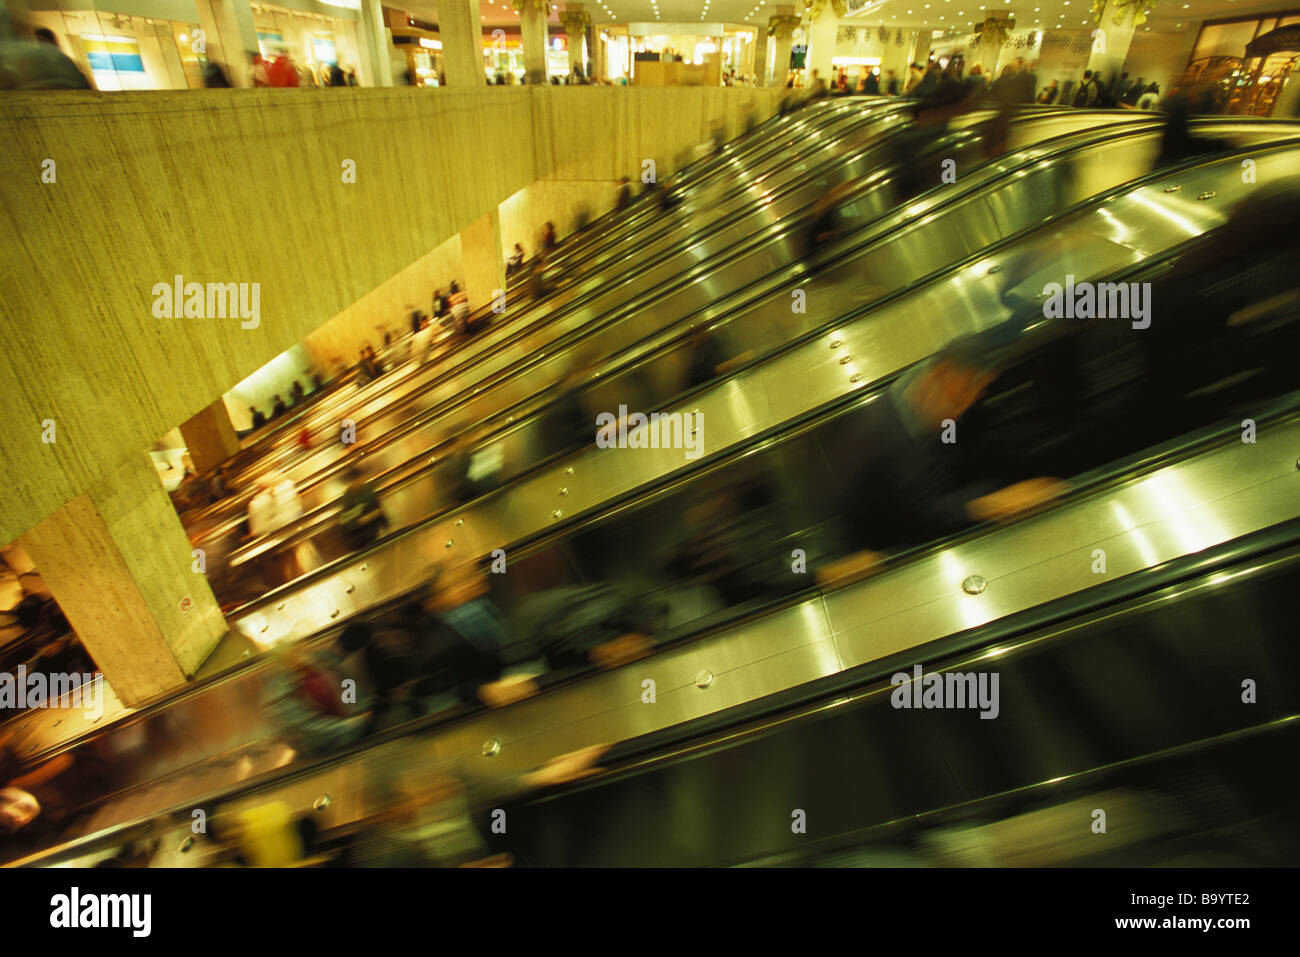 Escalators in crowded shopping mall Stock Photo